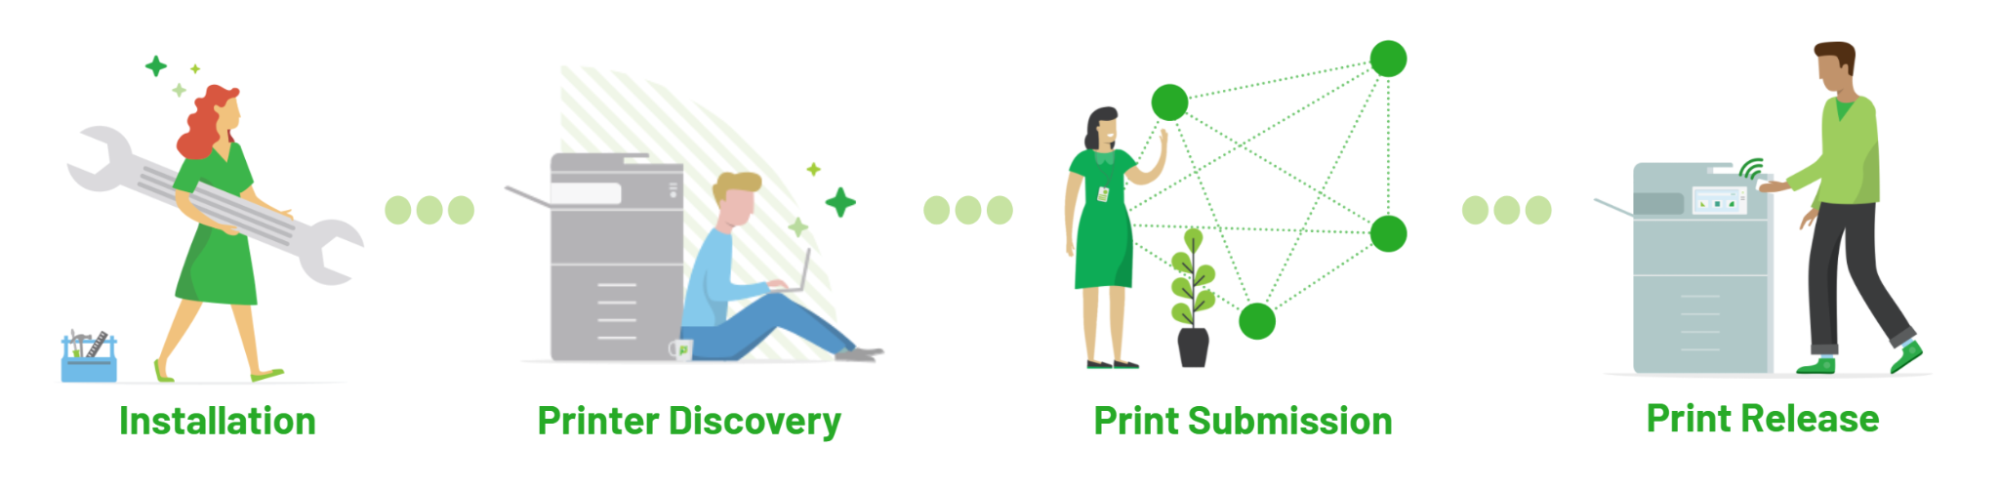 Illustration showing the different stages of printing, including installing the software, discovering printers, submitting your print job and releasing your print job.